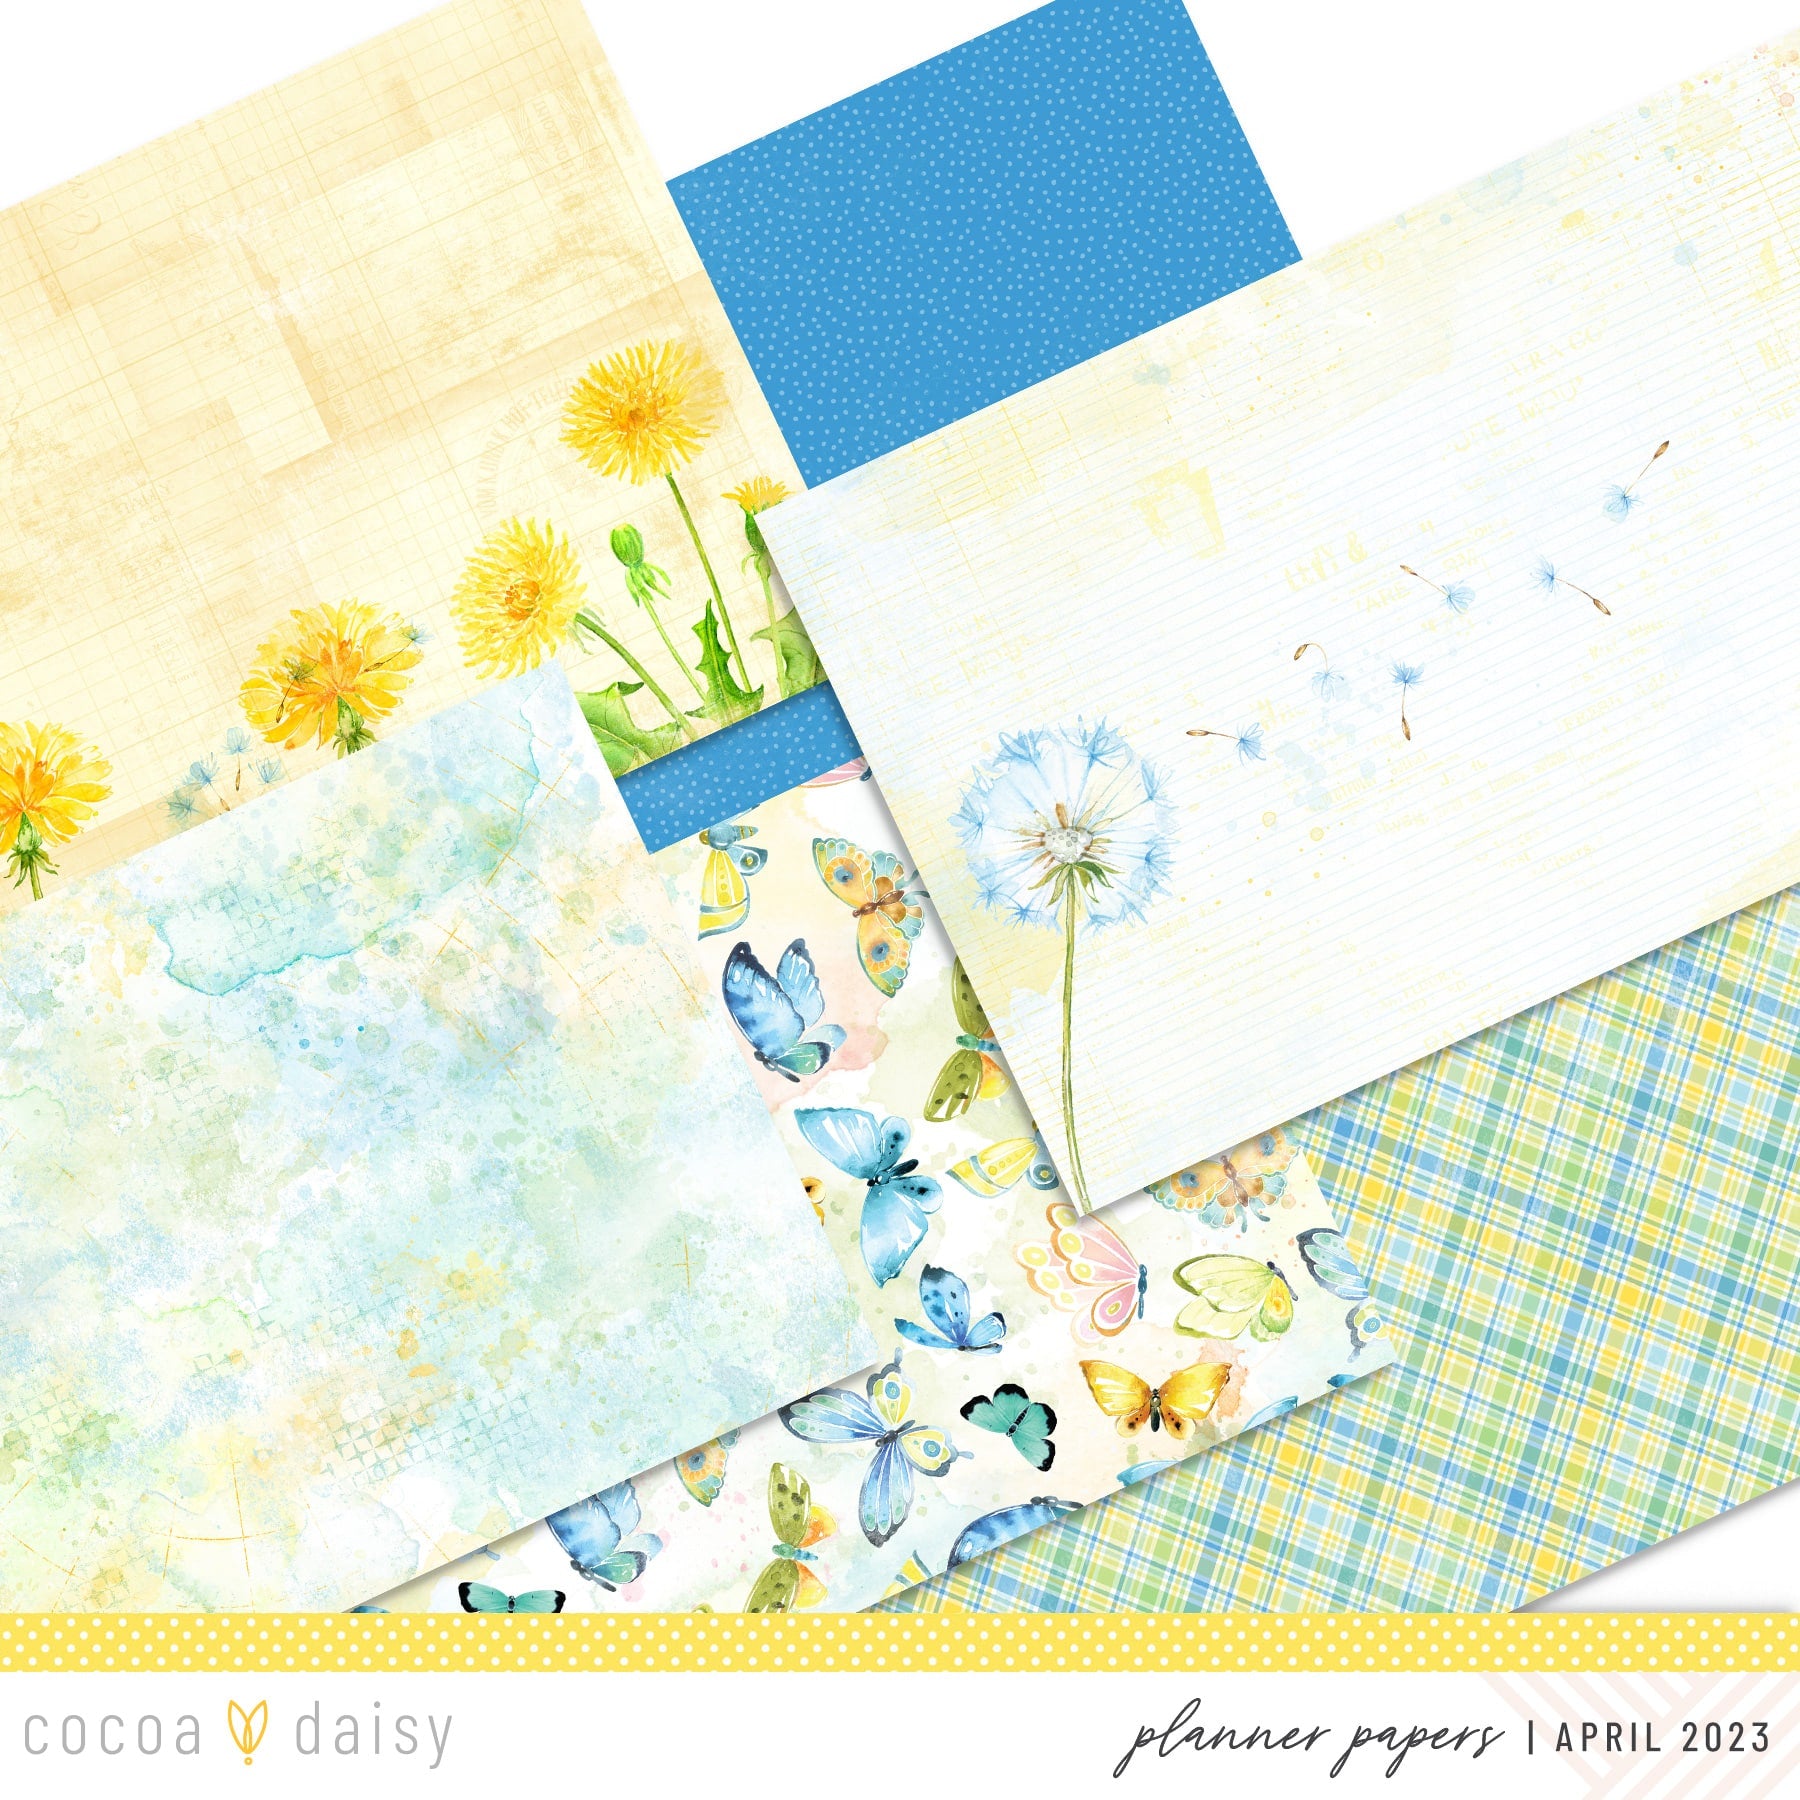 Dandelion Wishes Extra Papers from Planner Kits April 2023